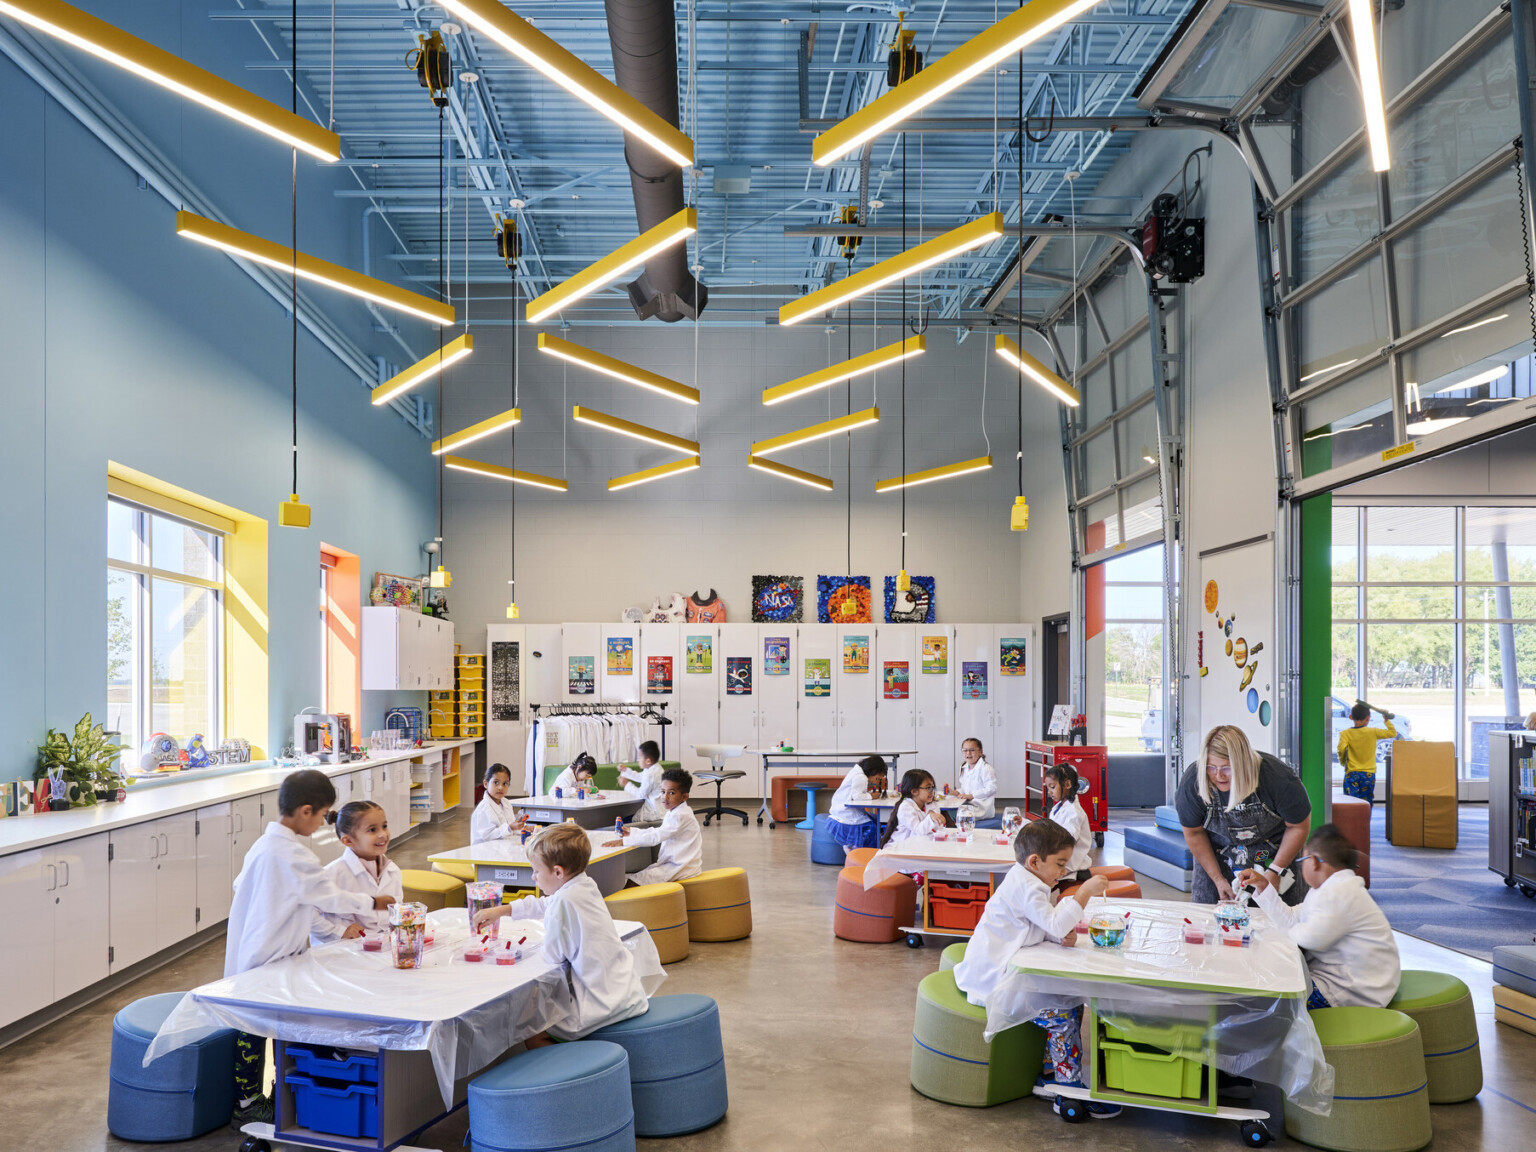 Classroom interior open-concept classroom with vaulted ceilings, custom lighting fixtures, brightly colored walls, natural daylight, children seated at worktables with colorful, ergonomic seating arrangements